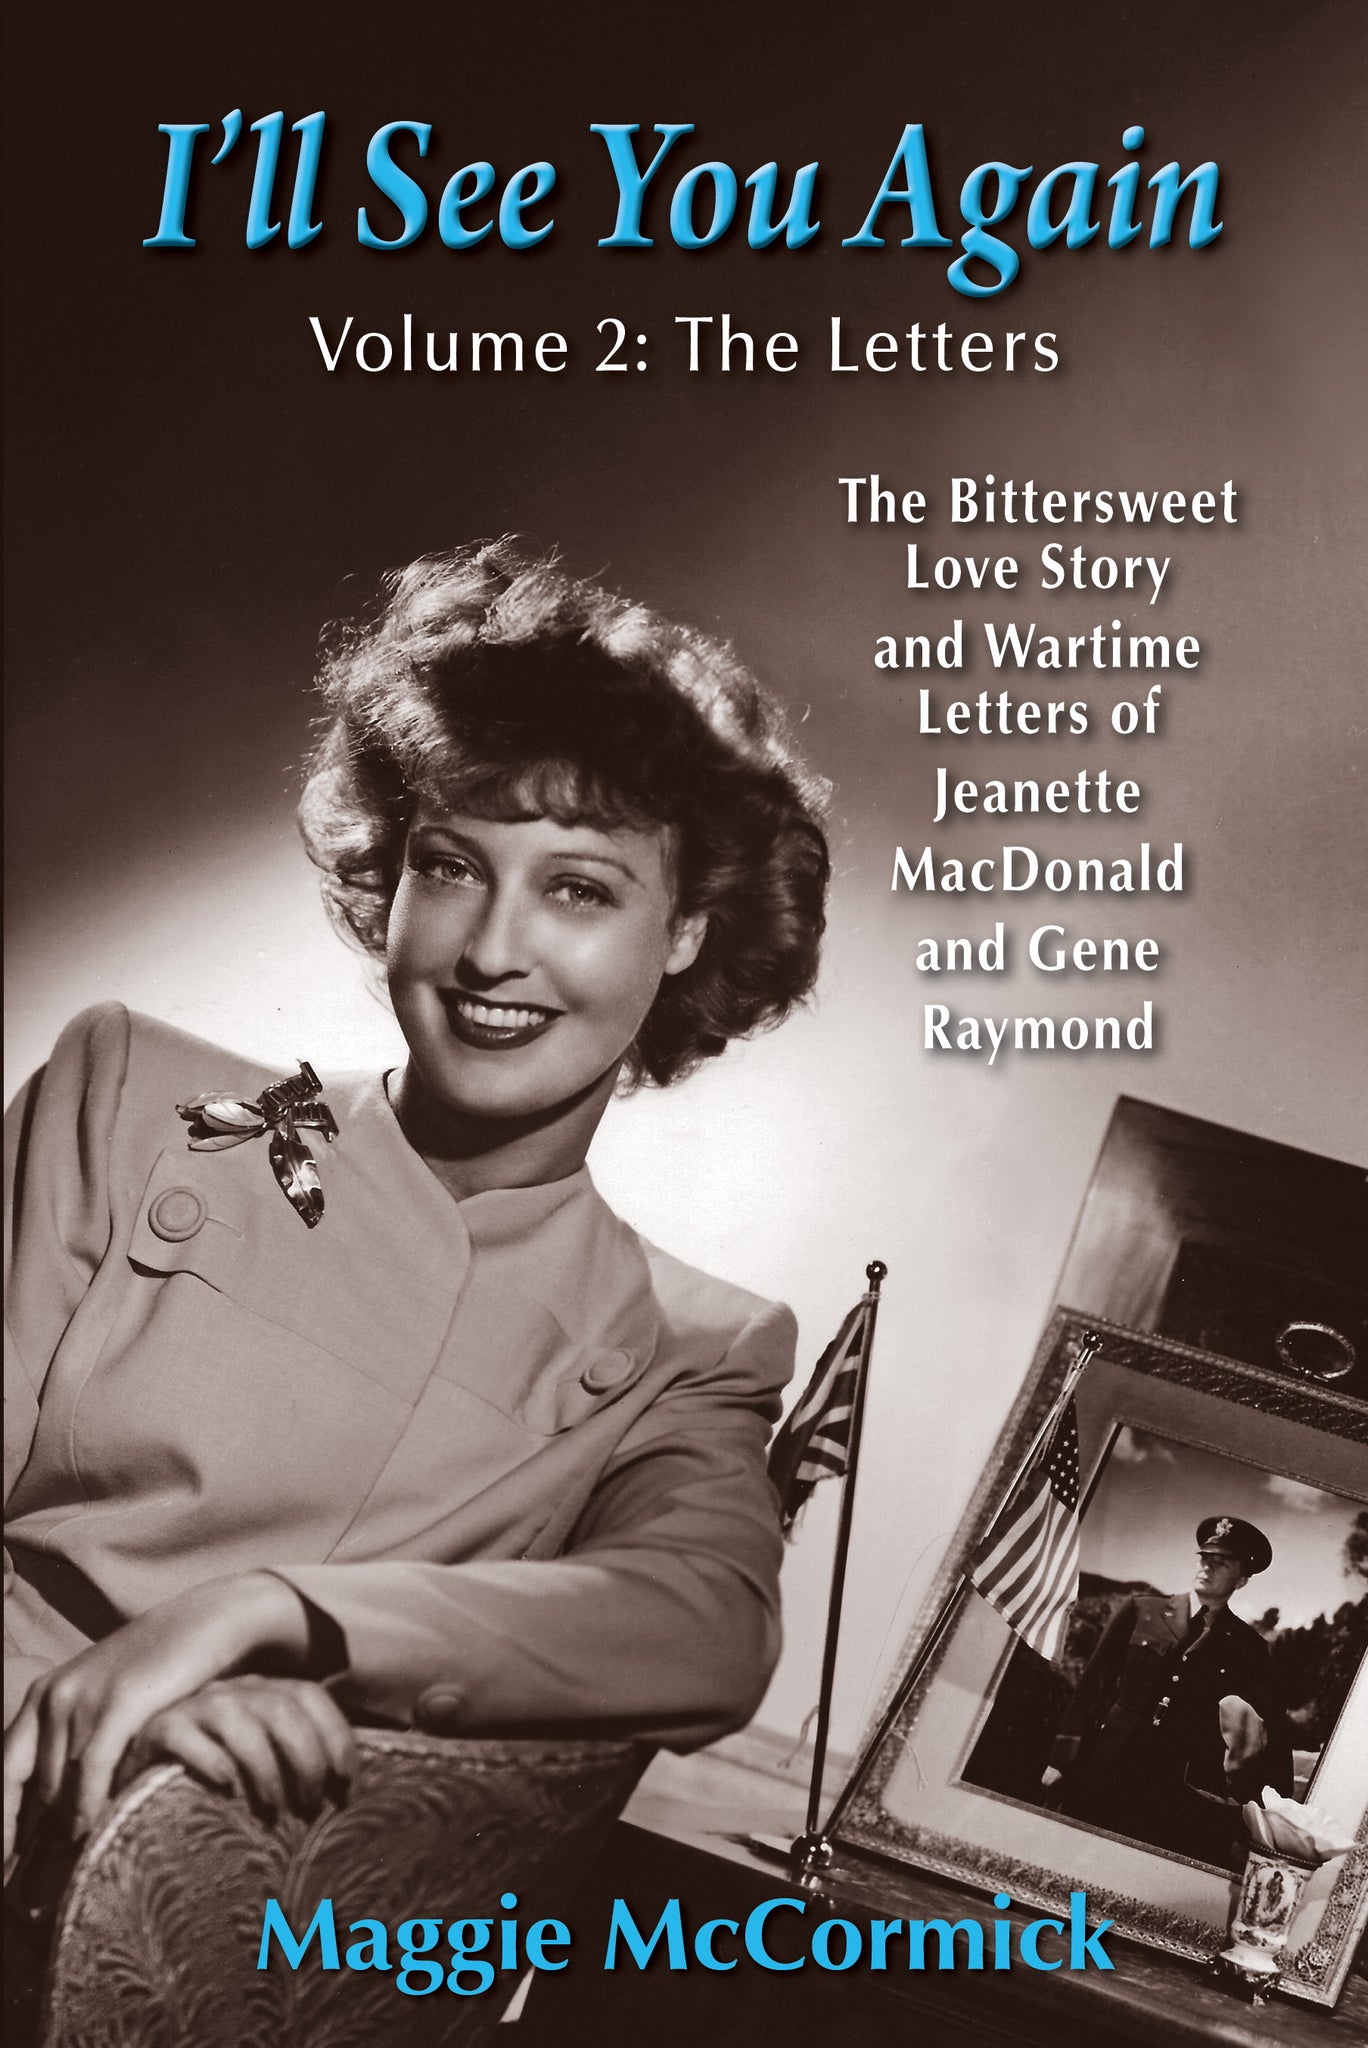 I'LL SEE YOU AGAIN: THE BITTERSWEET LOVE STORY AND WARTIME LETTERS OF JEANETTE MACDONALD AND GENE RAYMOND, VOL. 2 (SOFTCOVER EDITION) by Maggie McCormick - BearManor Manor